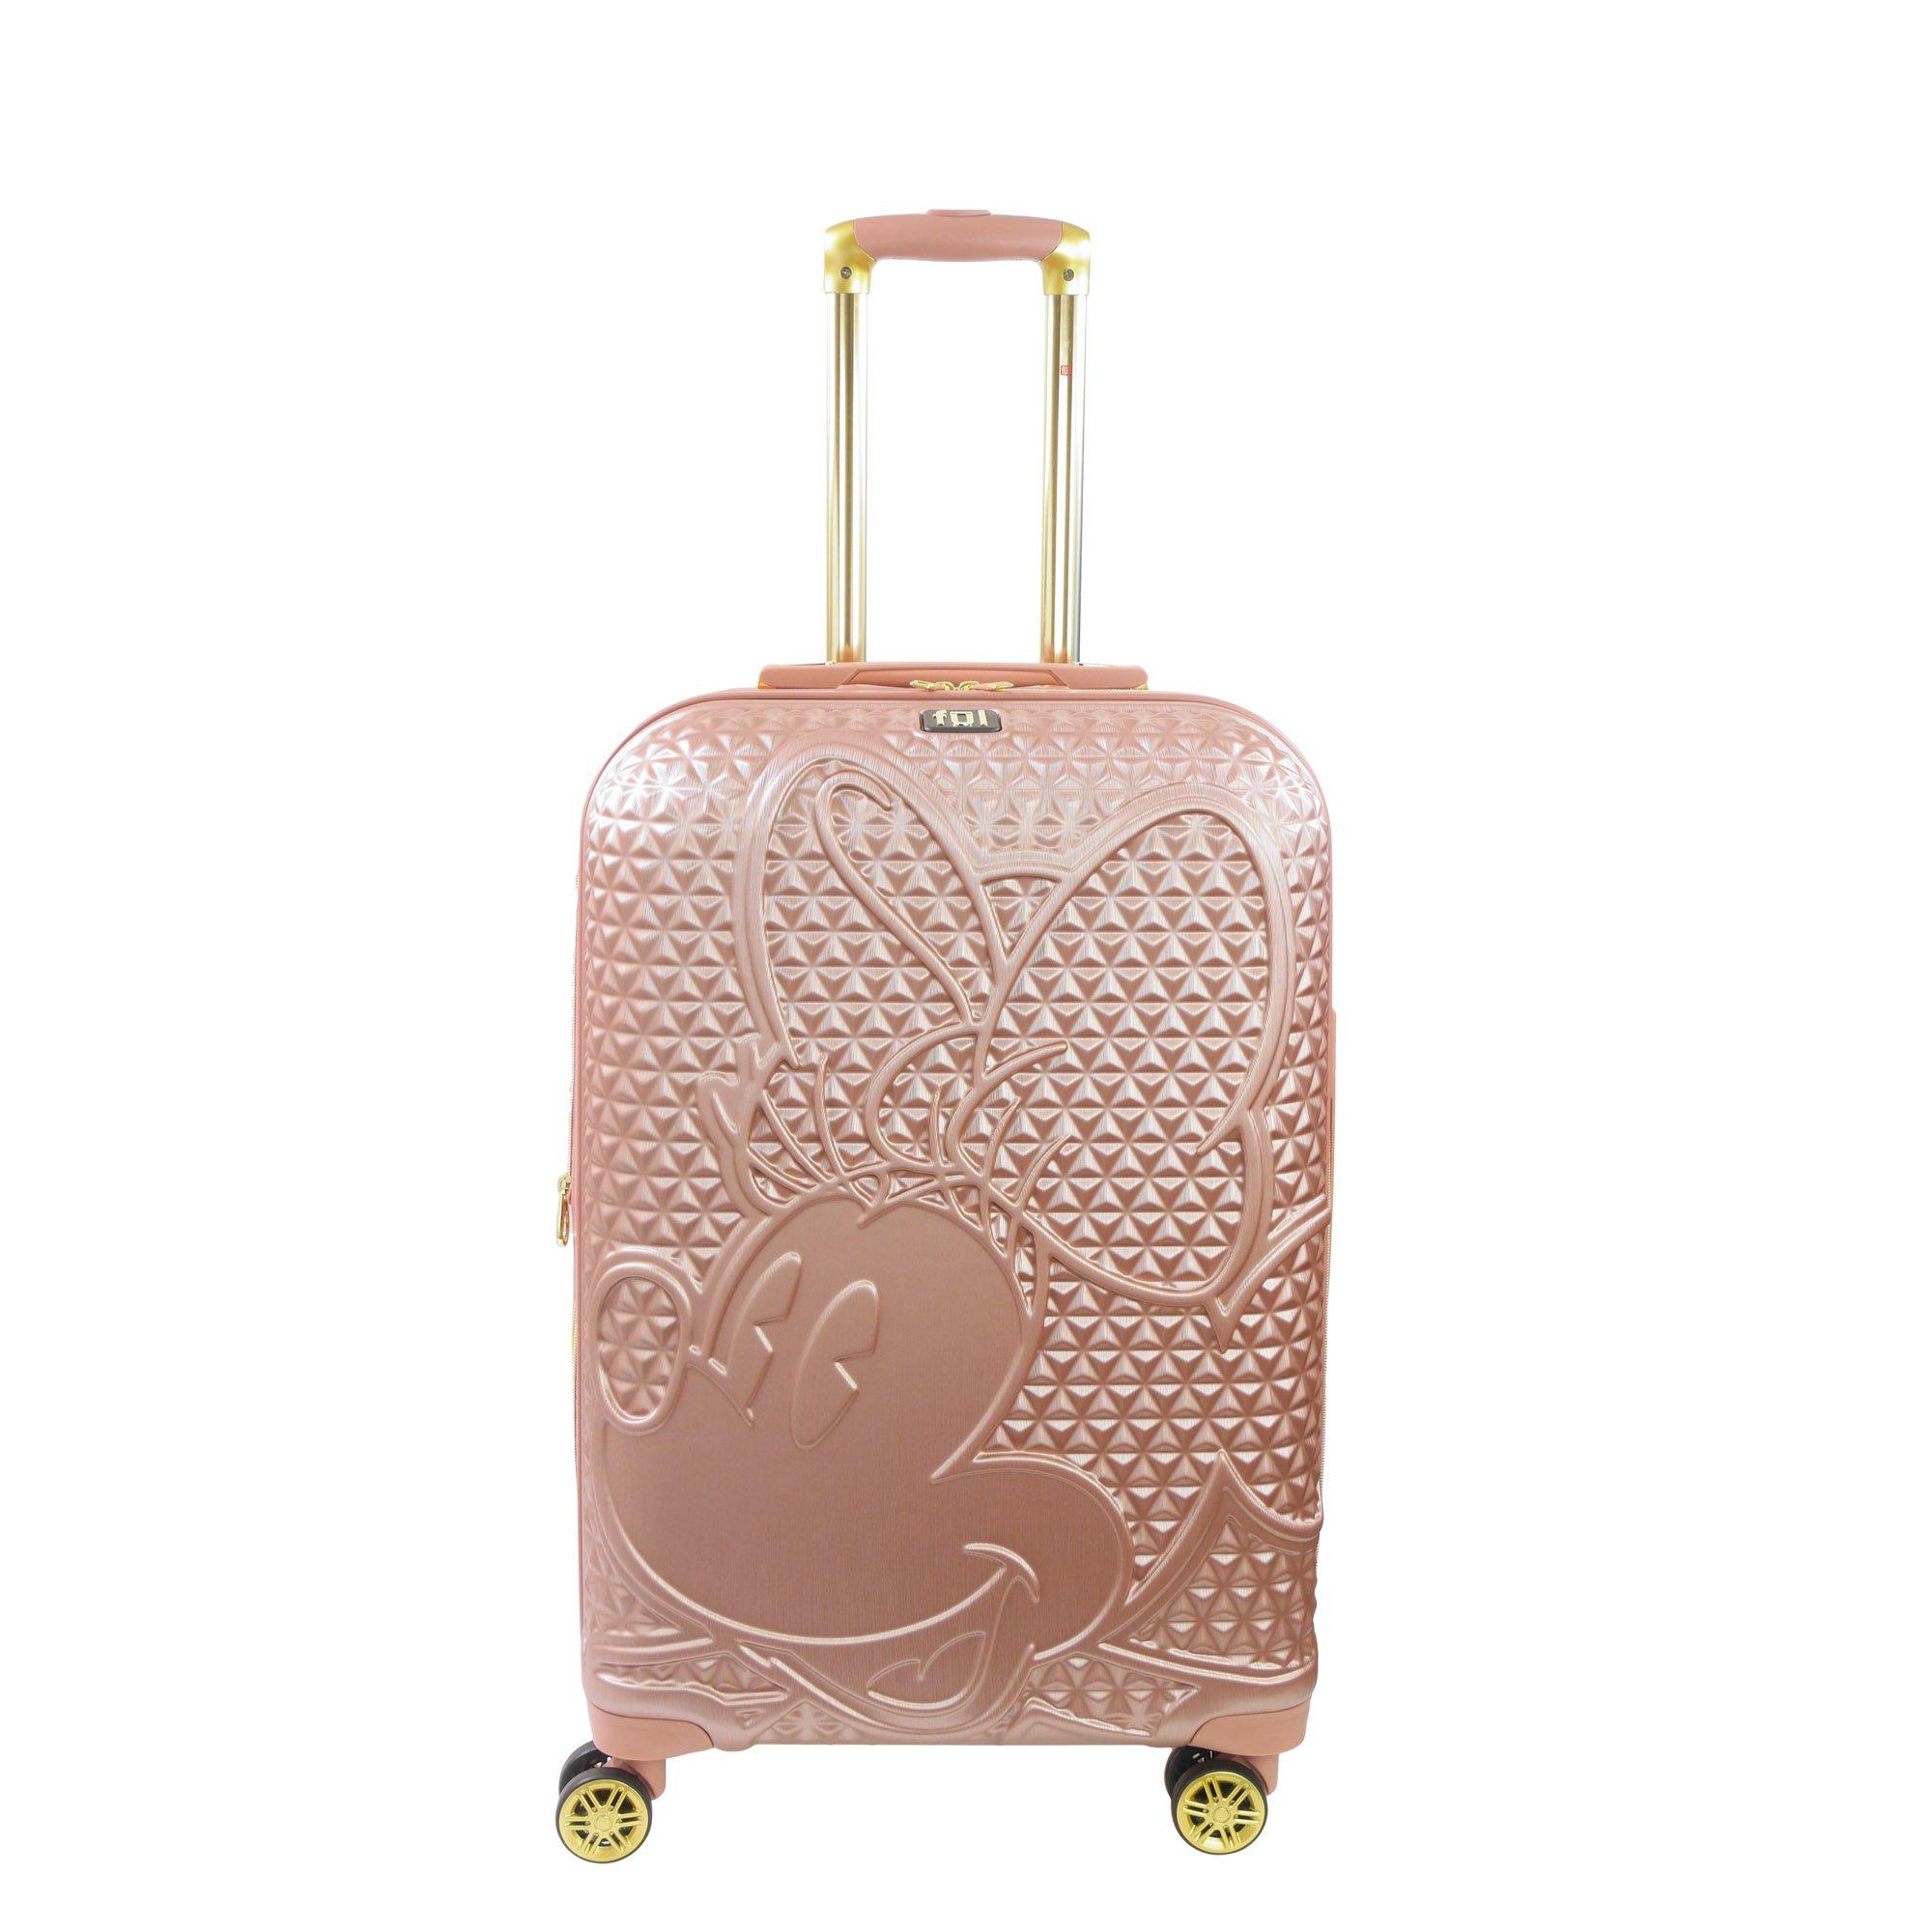 FUL Disney Textured Minnie Mouse 25-in Hard-Sided Luggage - Rose Gold, Concept One, Rosegold